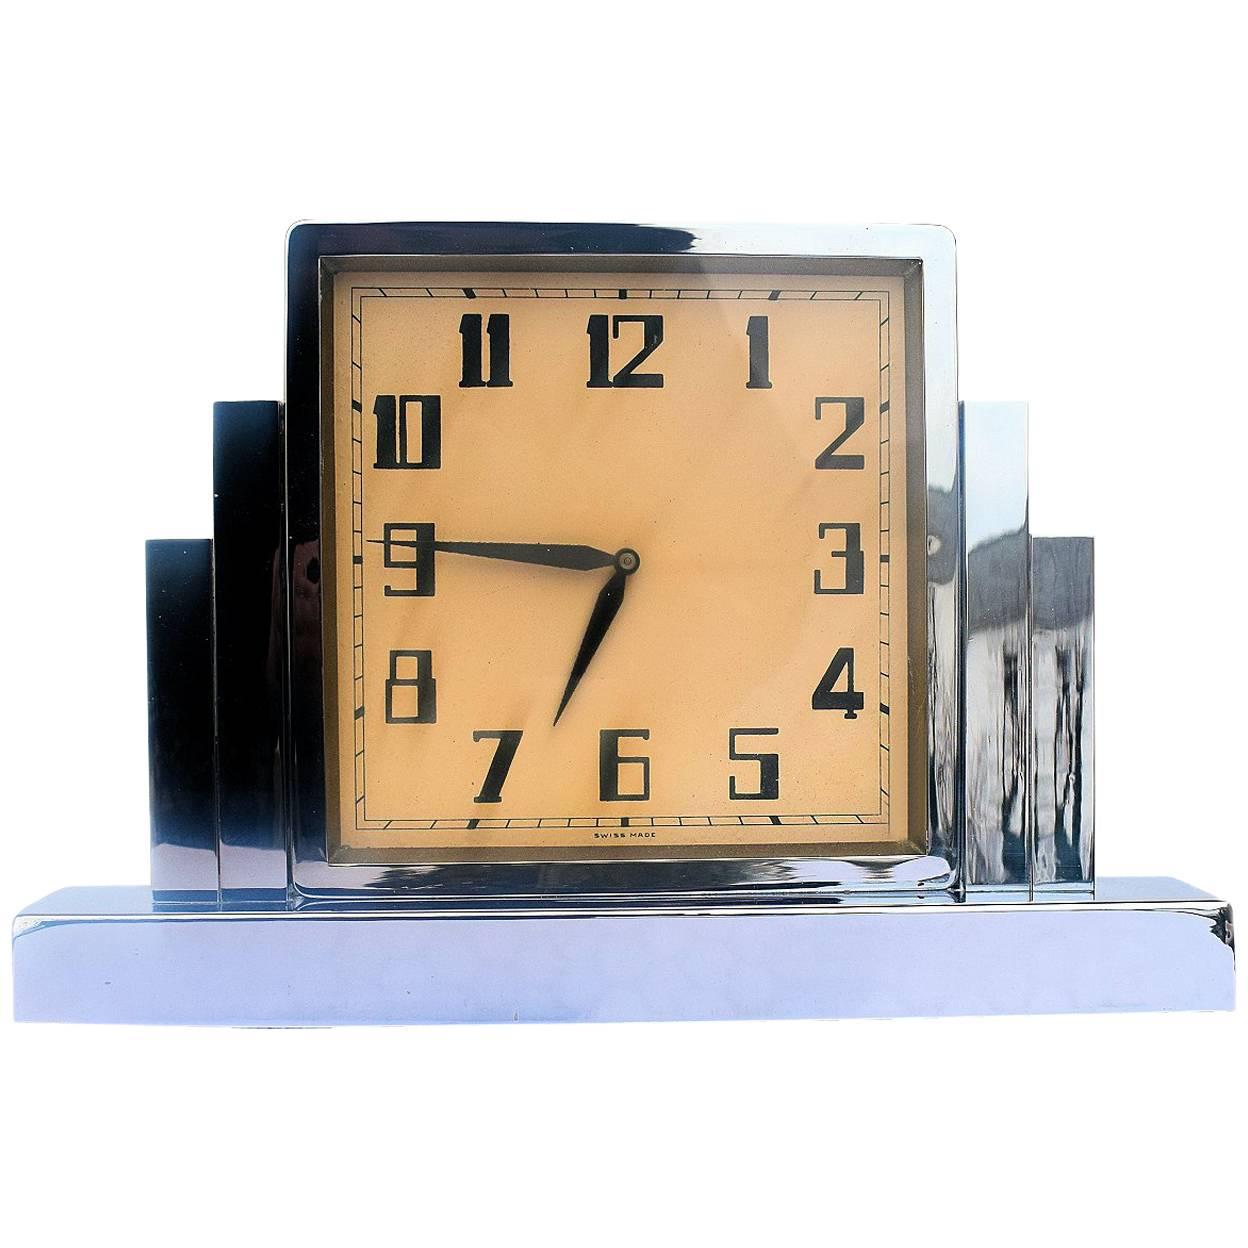 Large and Impressive 1930s Art Deco Nickel-Plated Mantle Clock